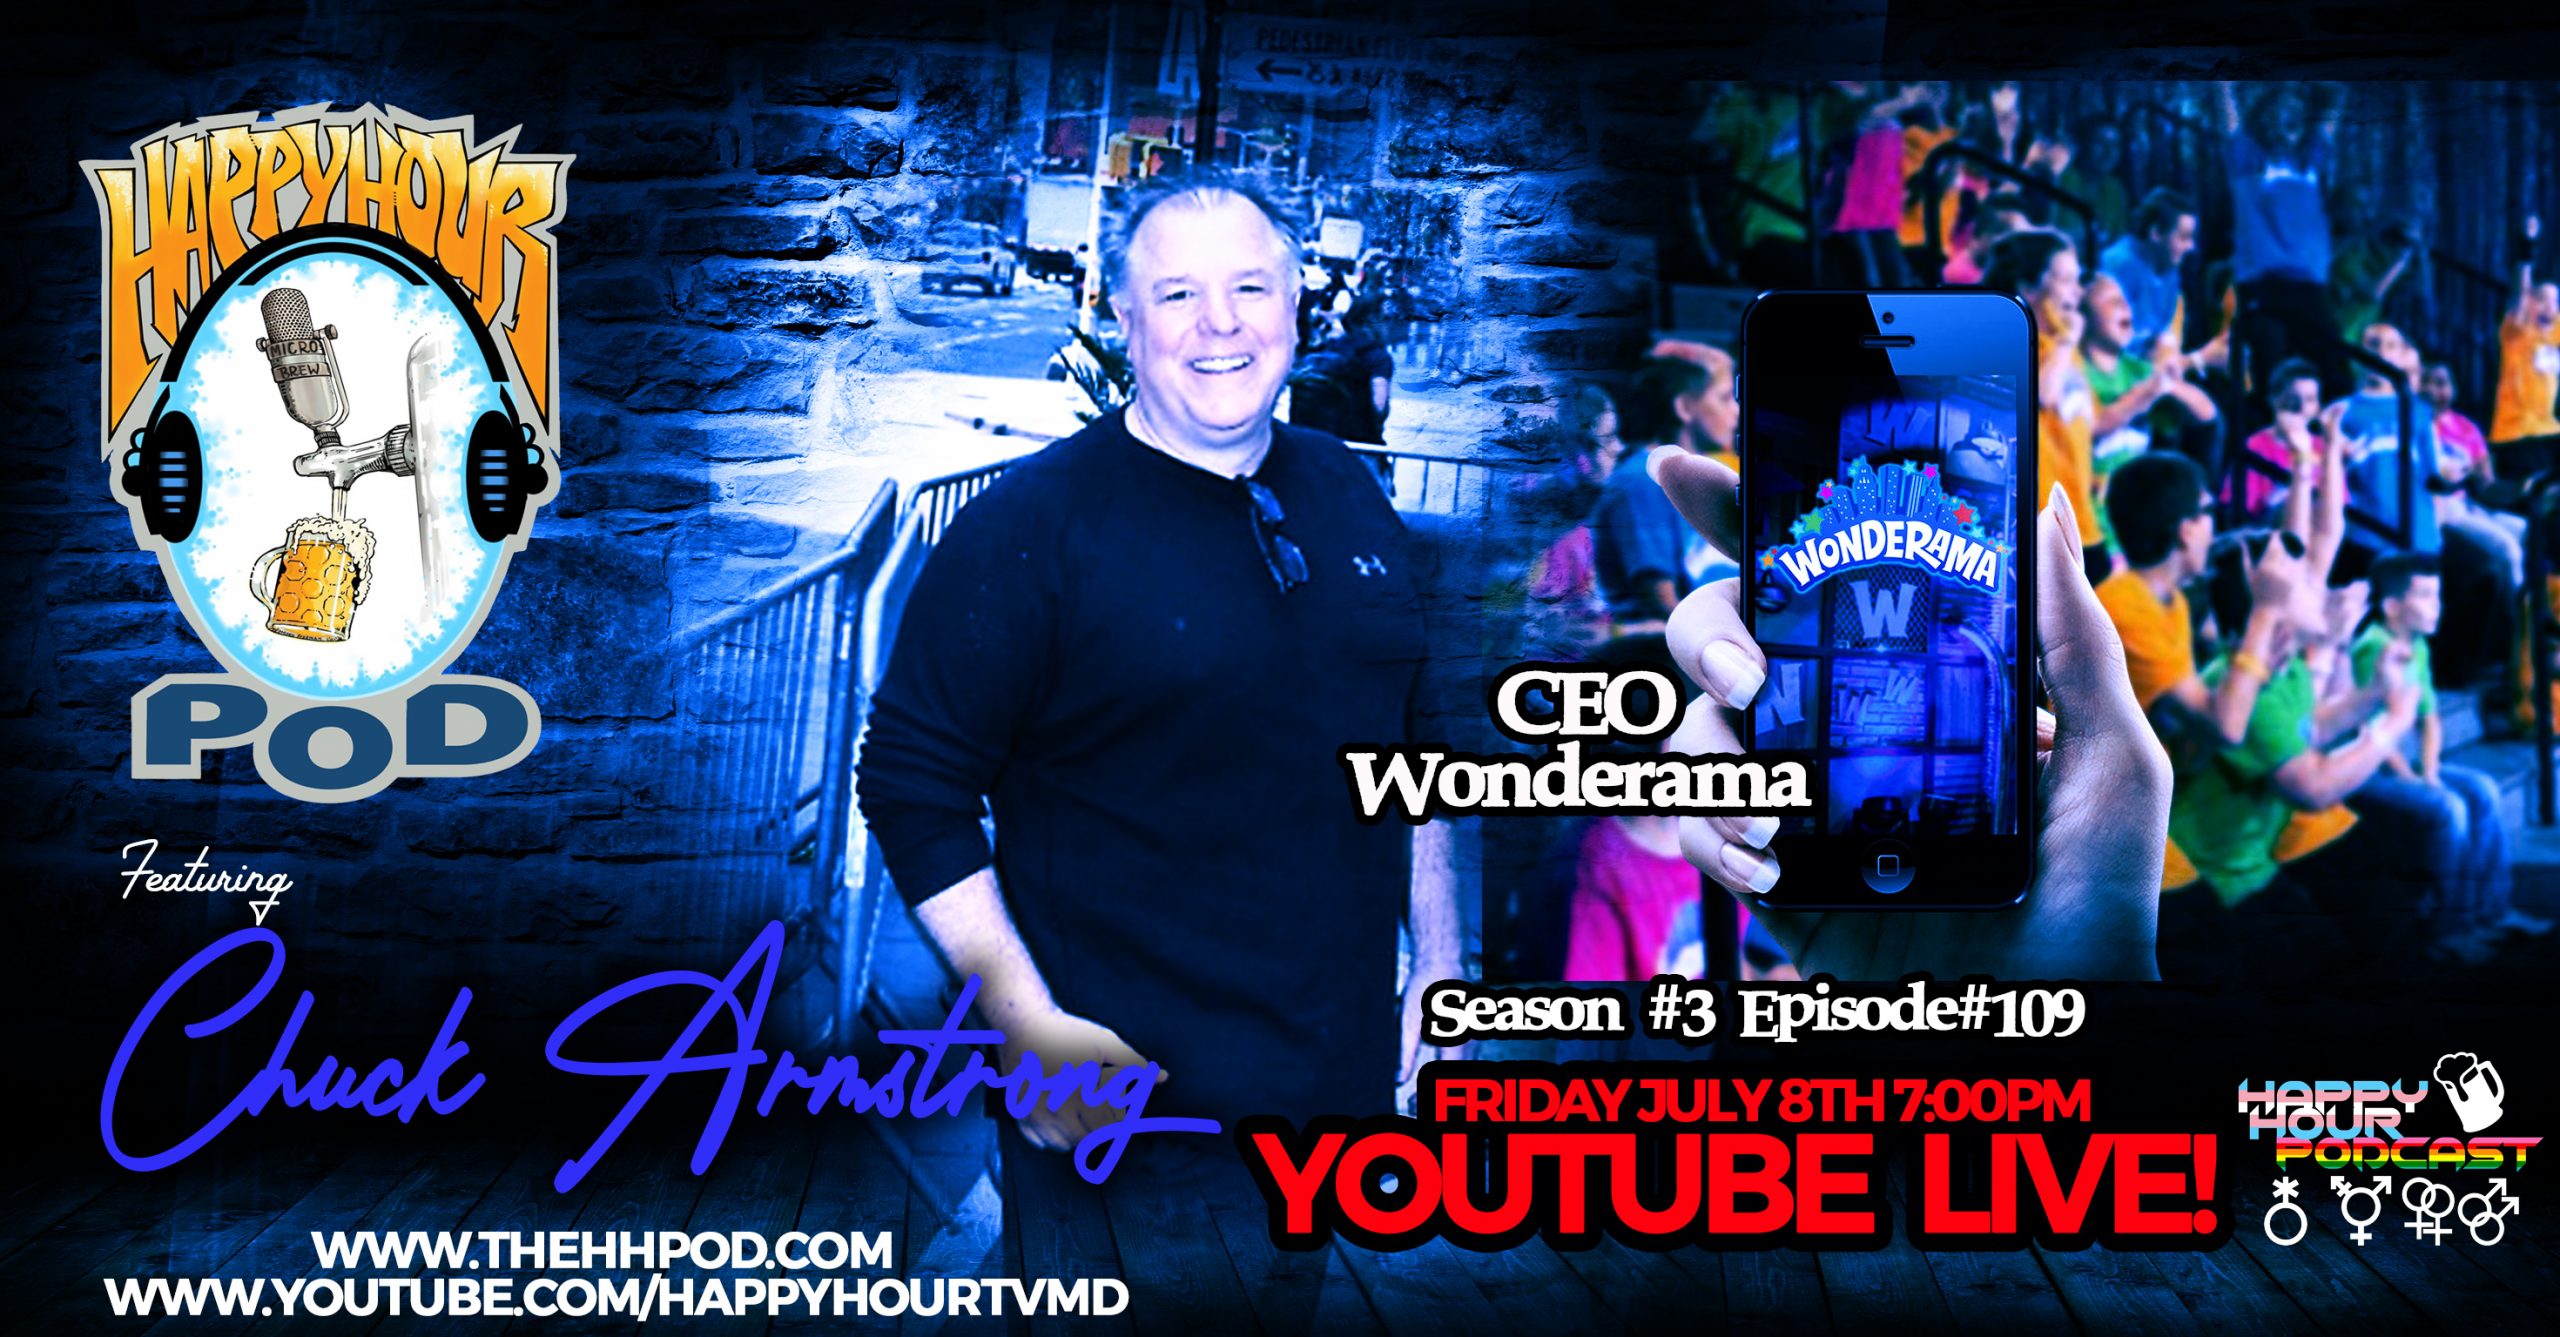 Featuring CEO Of Wonderama Chuck Armstrong Youtube Live 7/8 7pm Eastern Pre Game Starts at 6:45pm